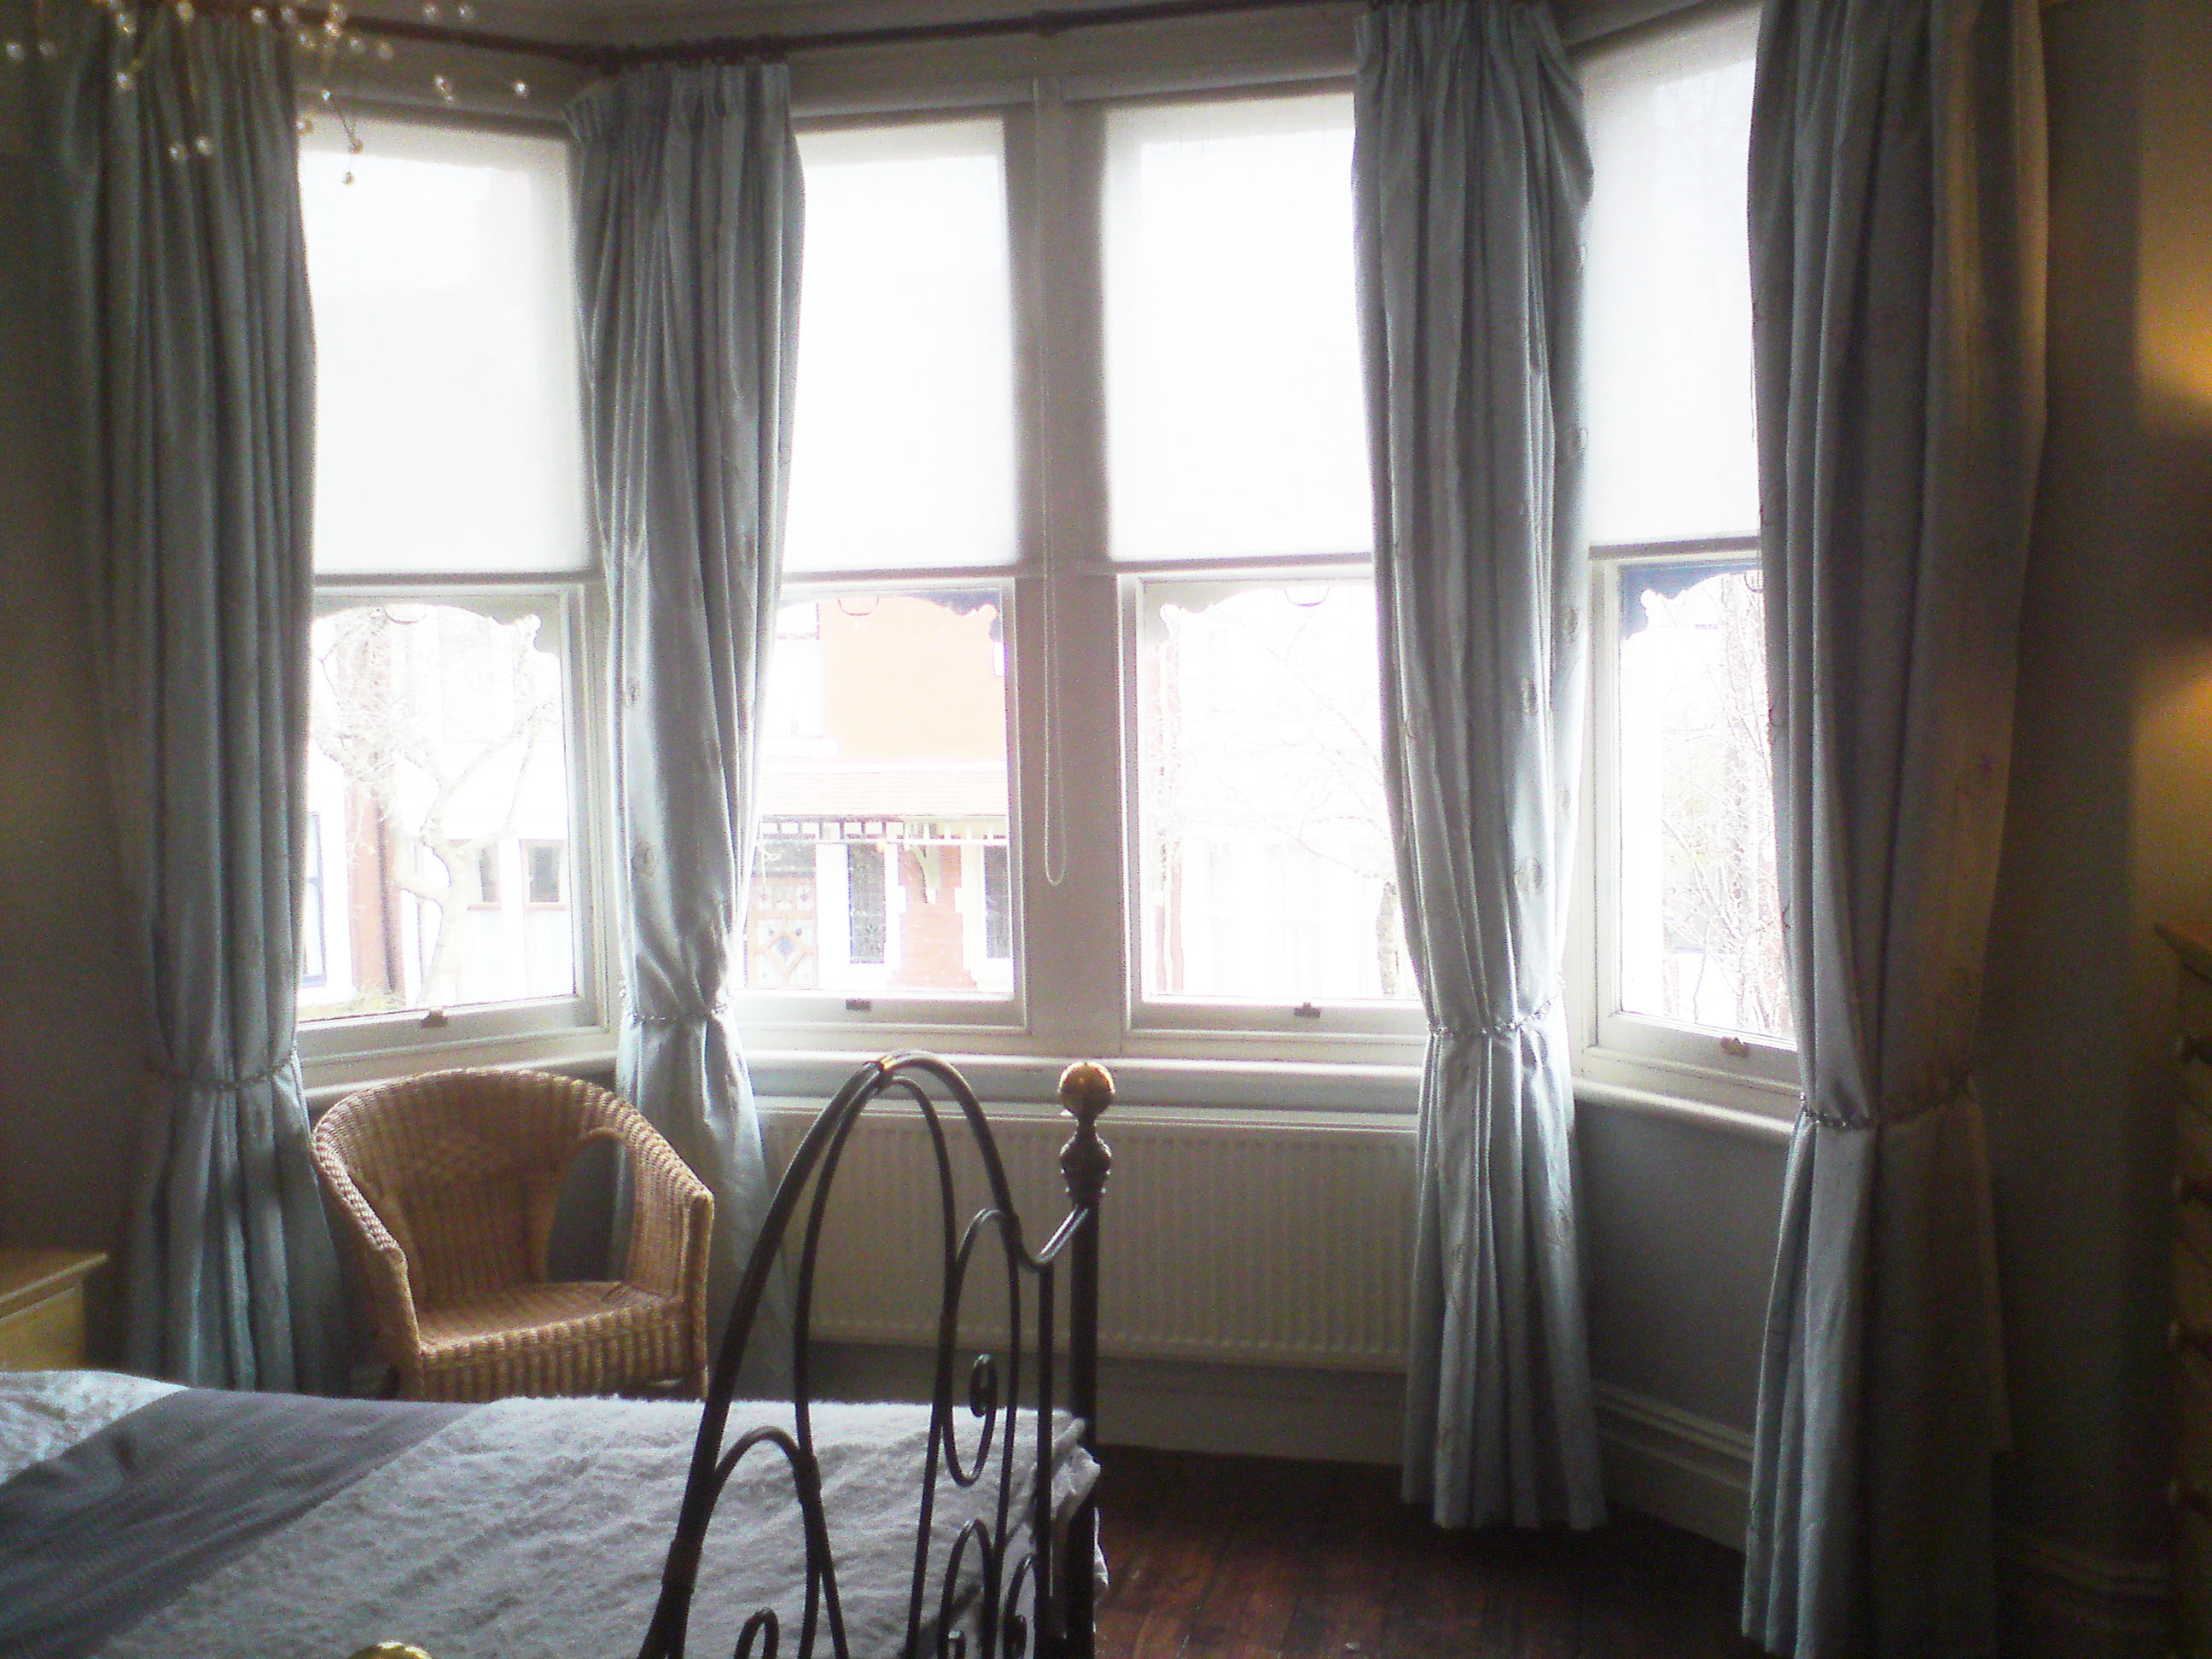 a photo of my bedroom bay window with four curtains on the old pole